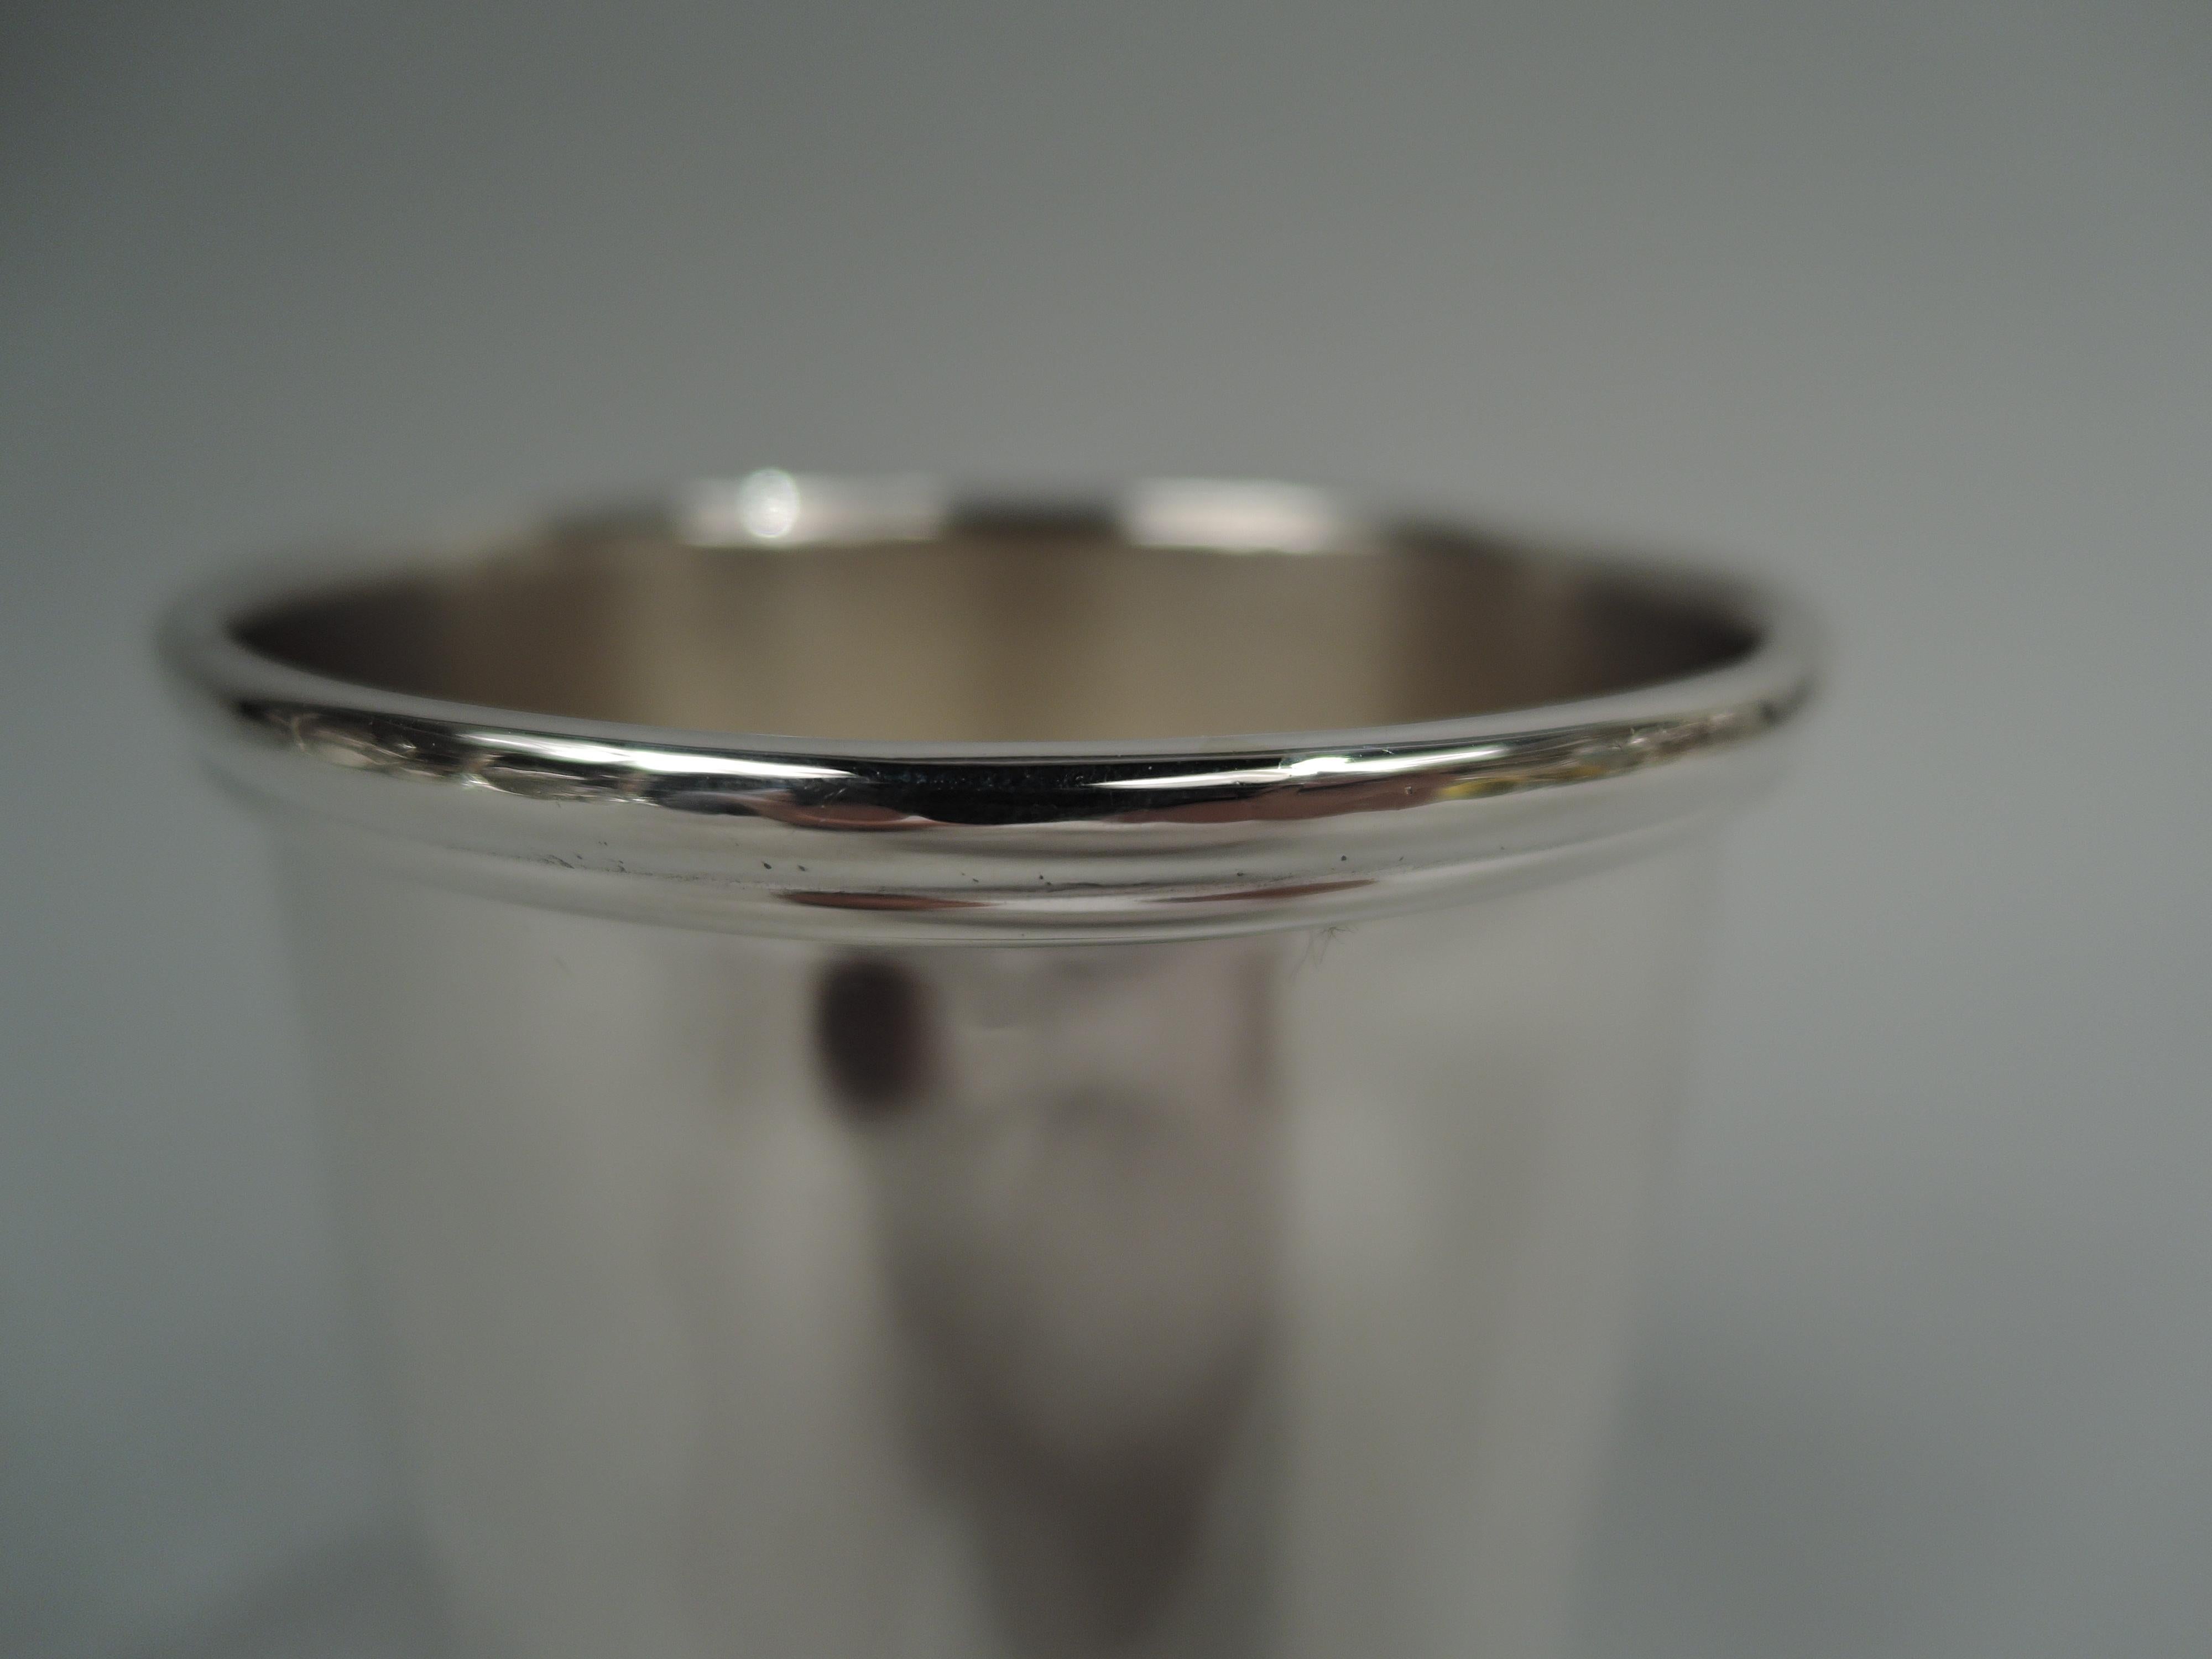 Small American sterling silver mint julep cup, ca 1930. Retailed by JE Caldwell in Philadelphia. Straight sides with molded rim and stepped foot. Fully marked including retailer’s stamp, no. 587, and phrase “Washington / Reproduction”. Weight: 3.3